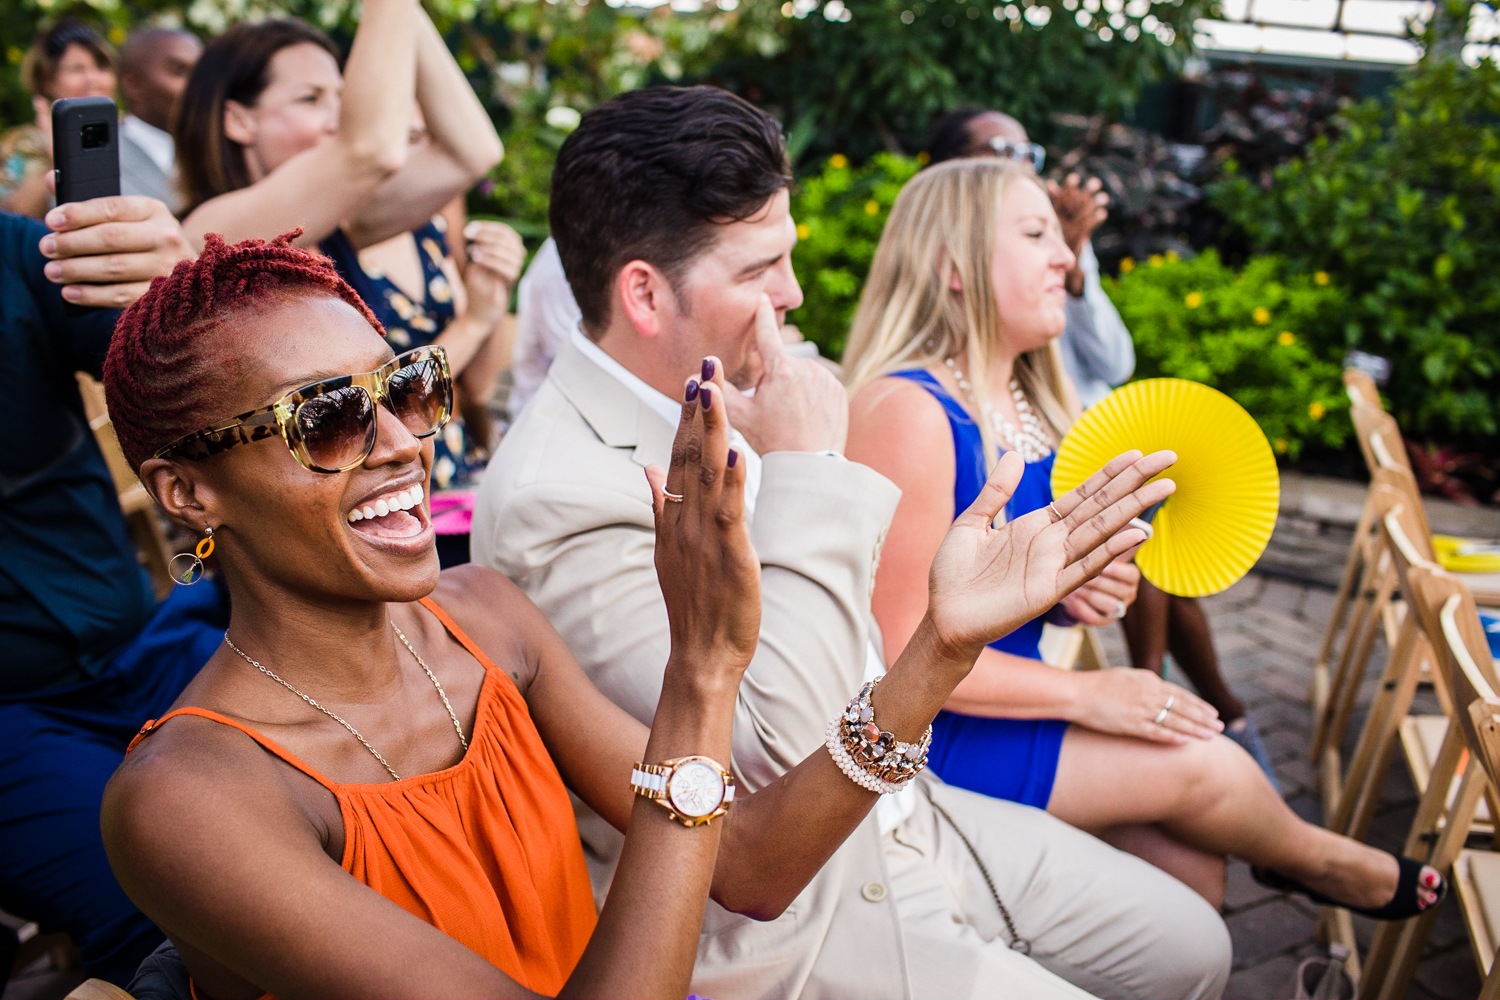 Guests react to a wedding ceremony at a Garfield Park Conservatory wedding.